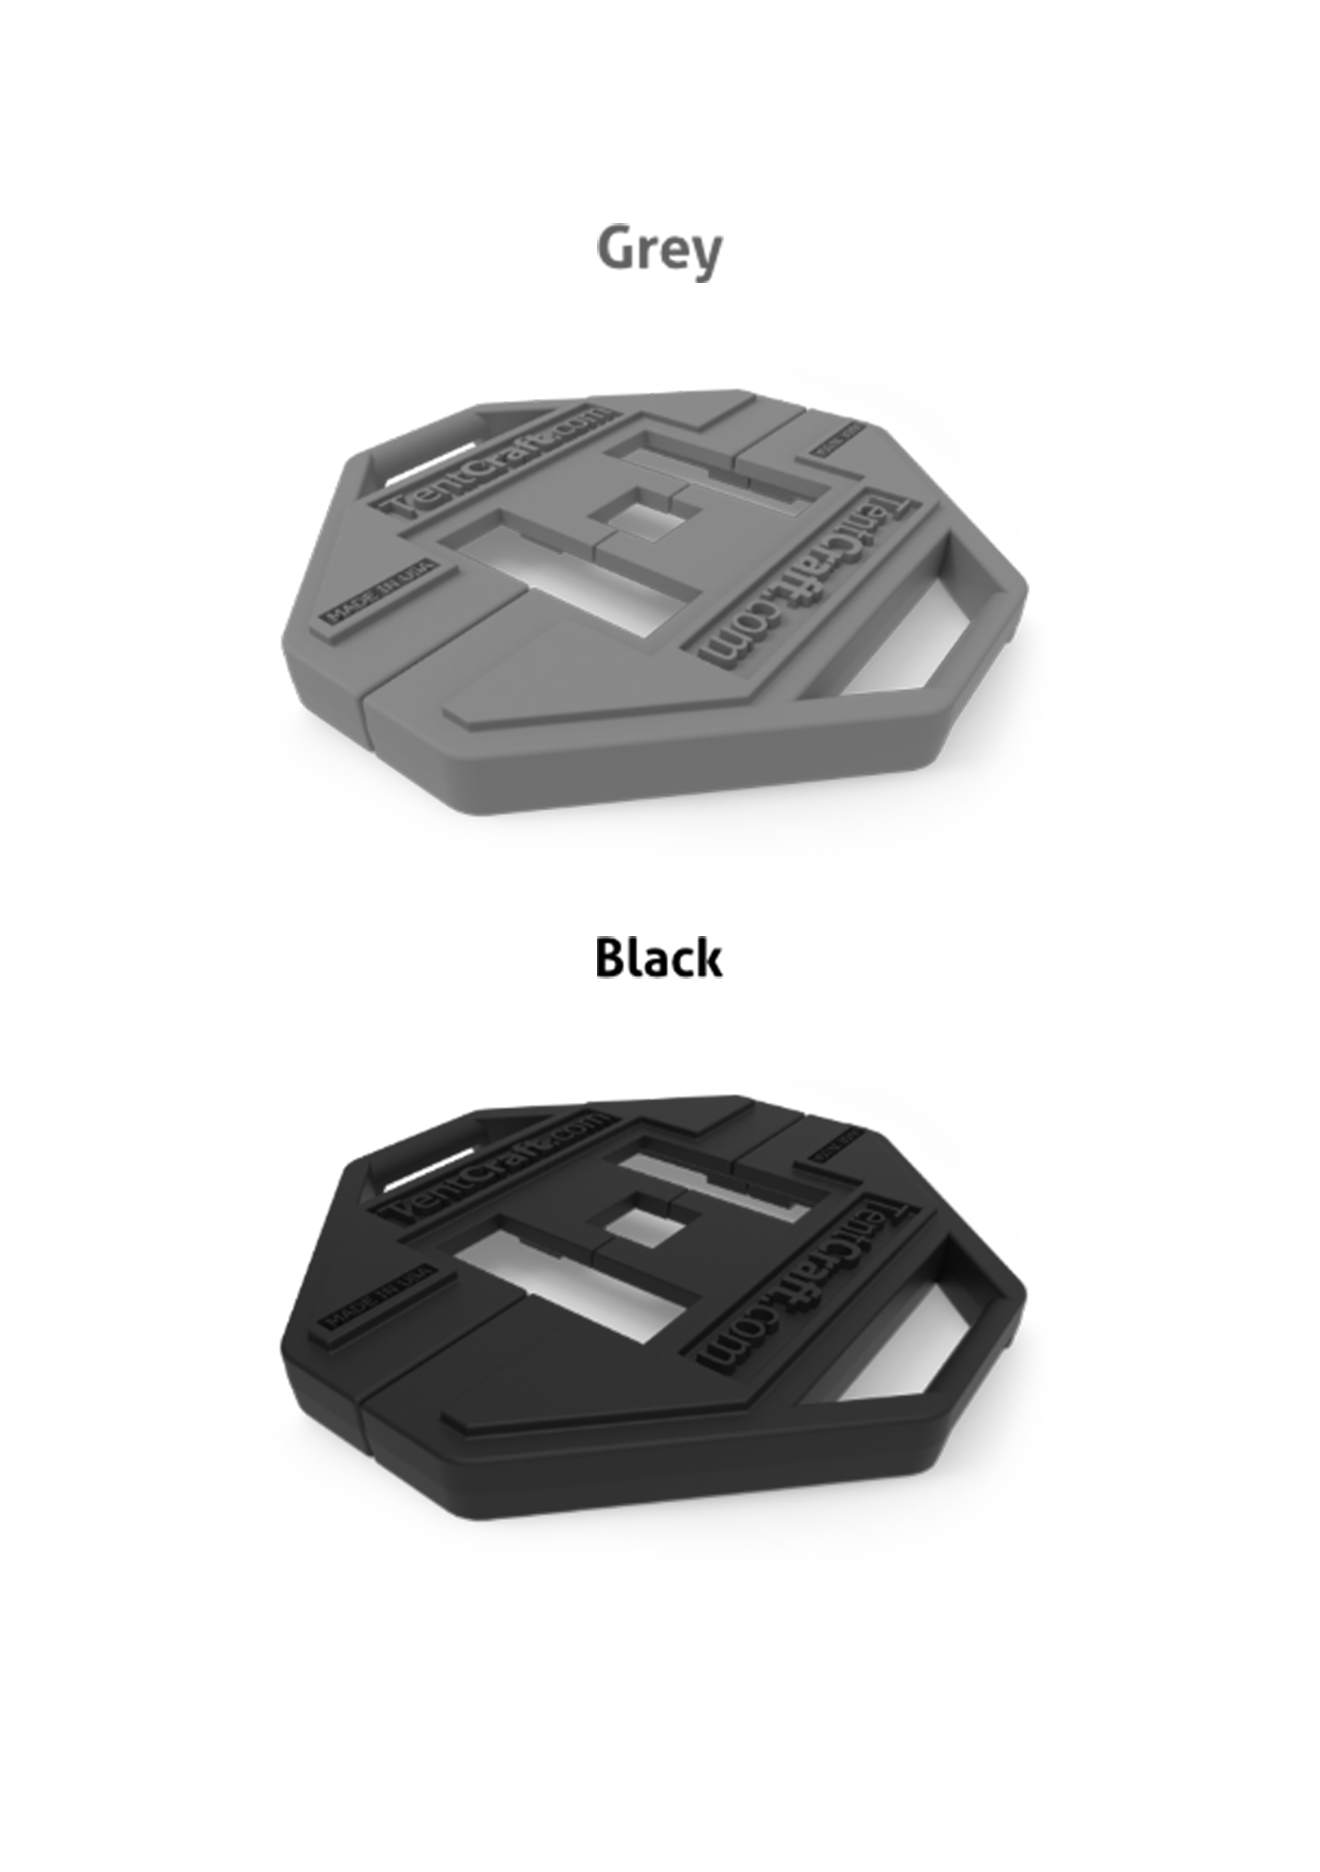 Weighted Footplates come in both black and gray